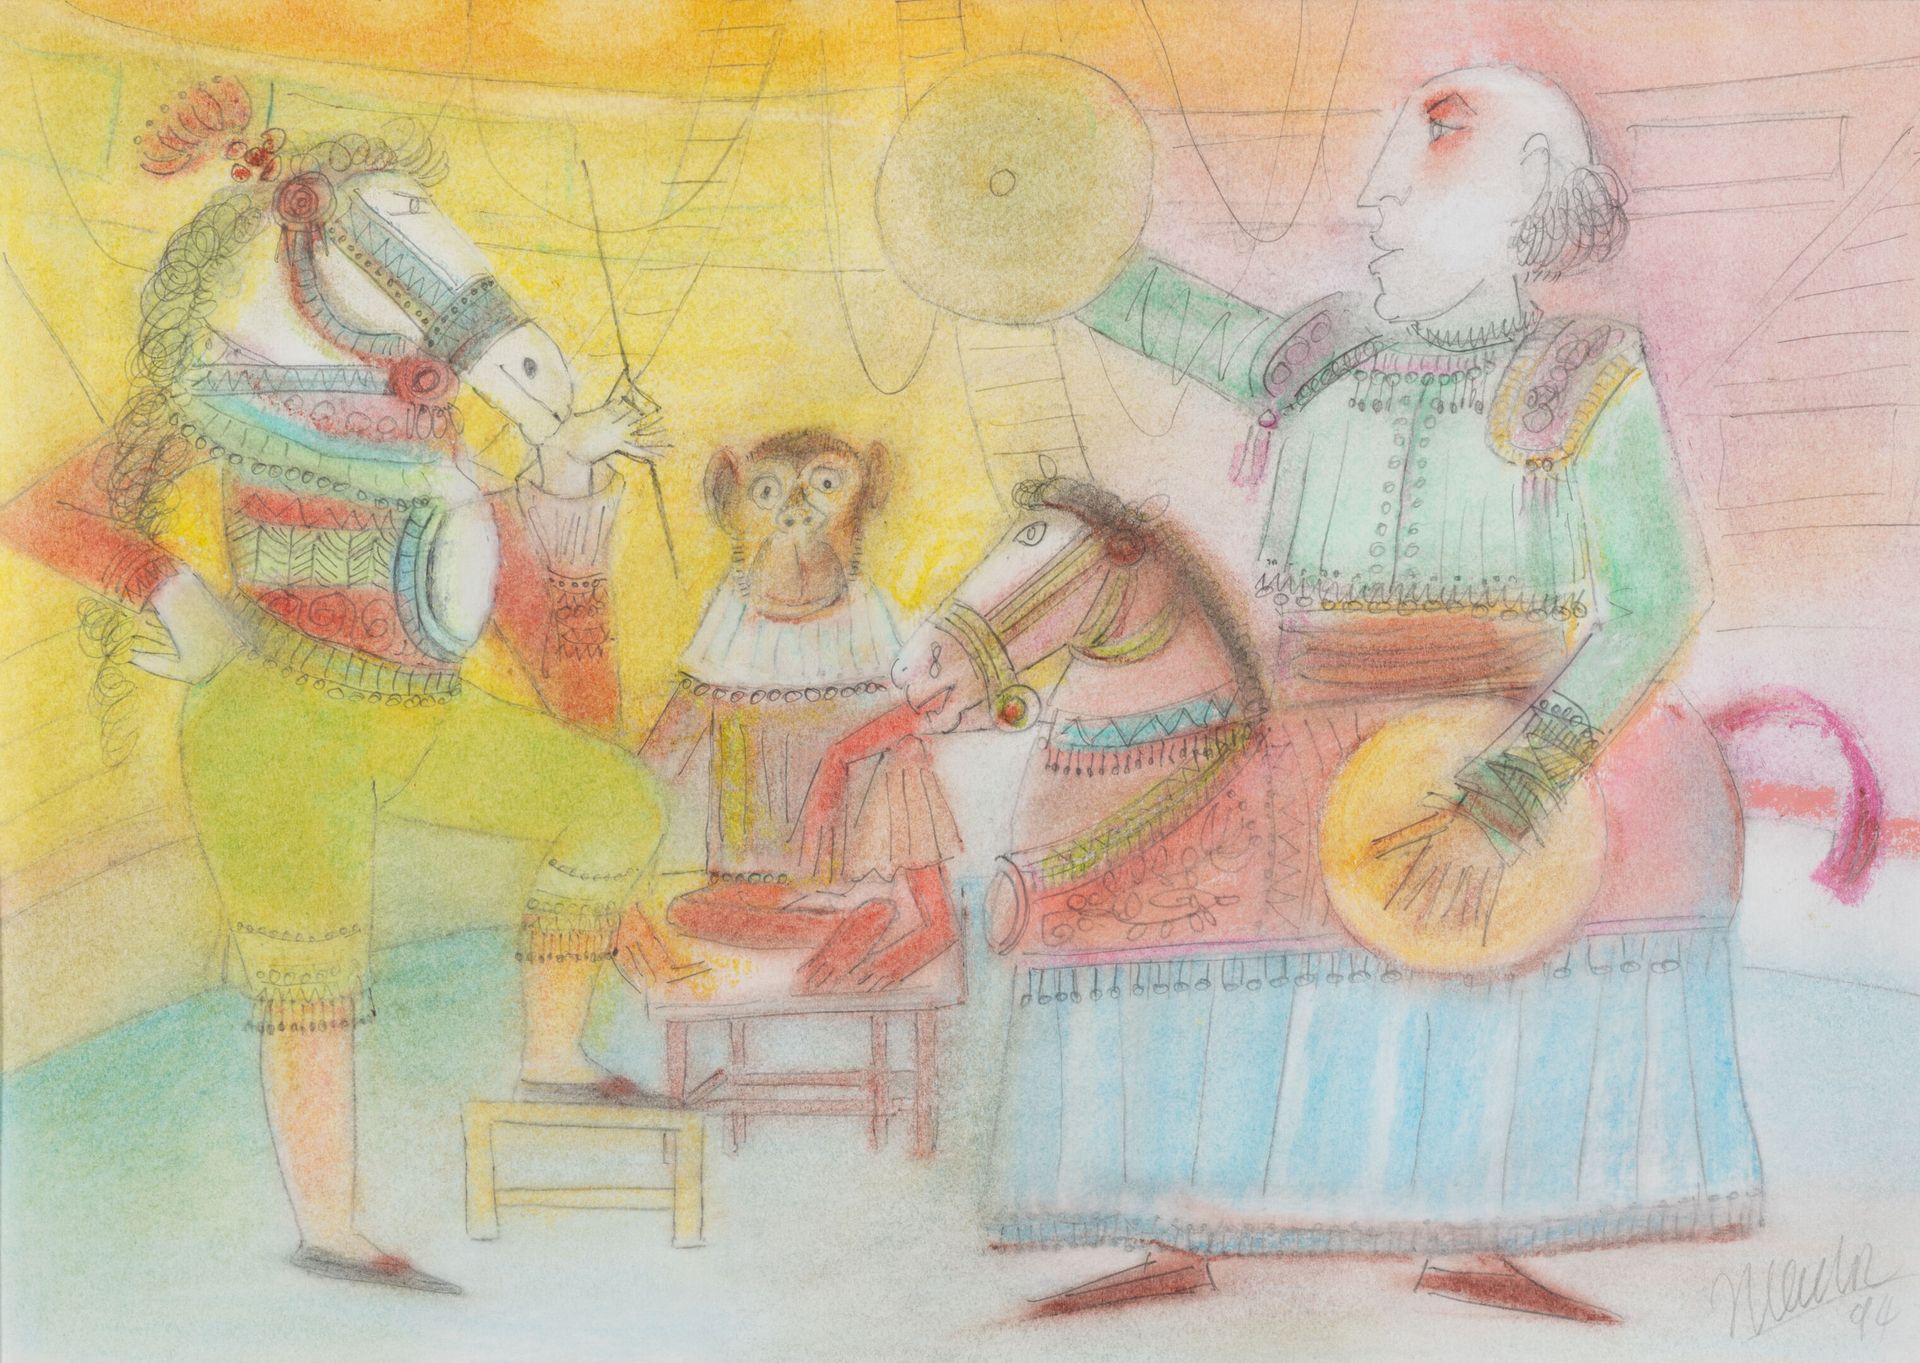 Blasco MENTOR (1919-2003) At the circus, 1994.
Colored pencils on paper.
Signed &hellip;